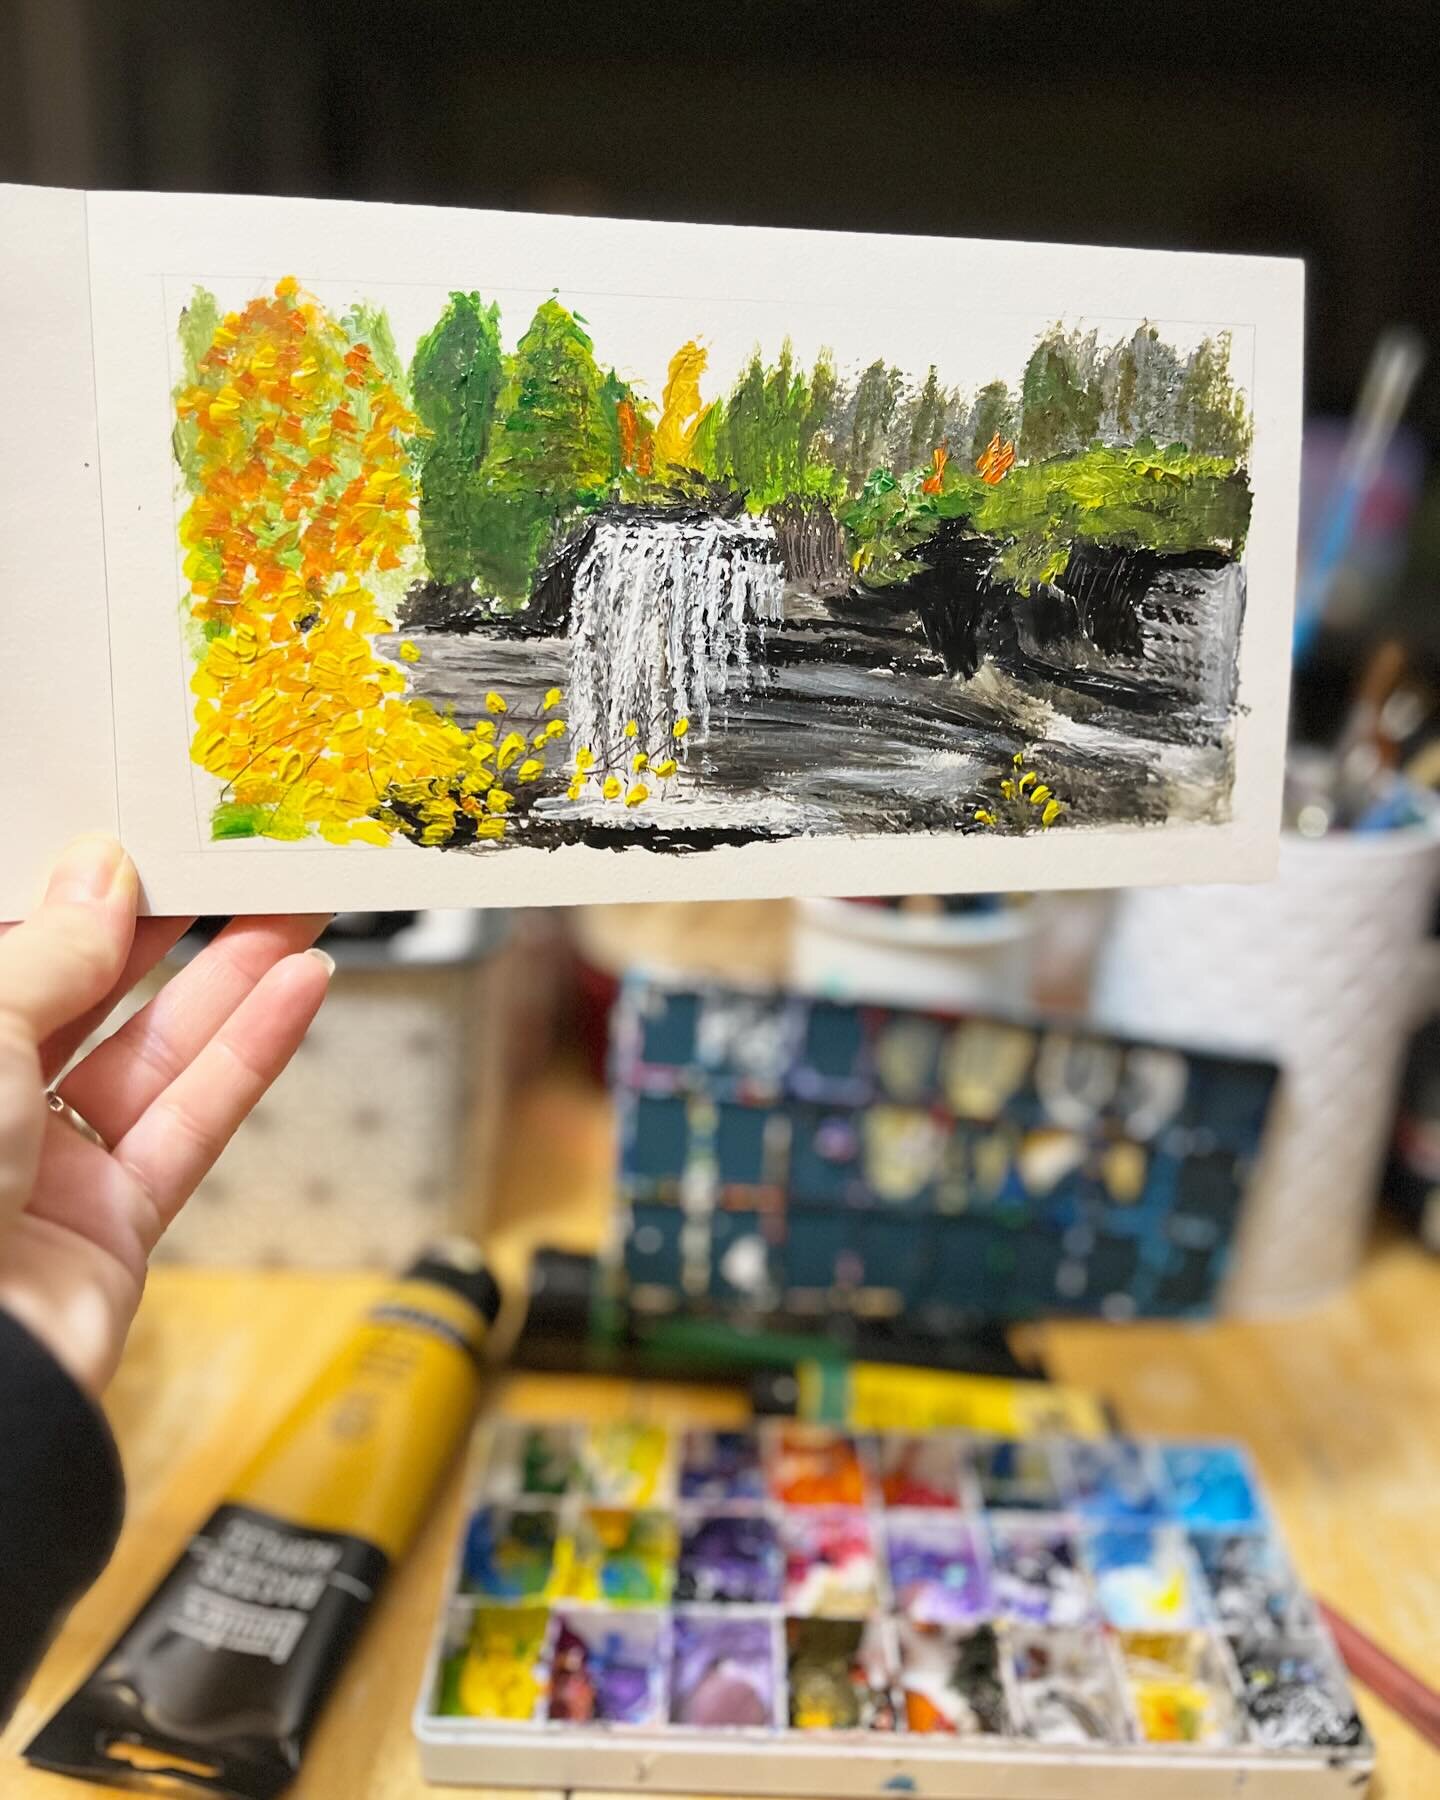 Day 33! I haven&rsquo;t had a lot to show since I worked on a floral painting (which I hate lol) and a fall scene (scroll to see the unfinished piece, I&rsquo;ll finish this weekend). But tonight I did a little paint sketch of Bridal Veil Falls. 

I 